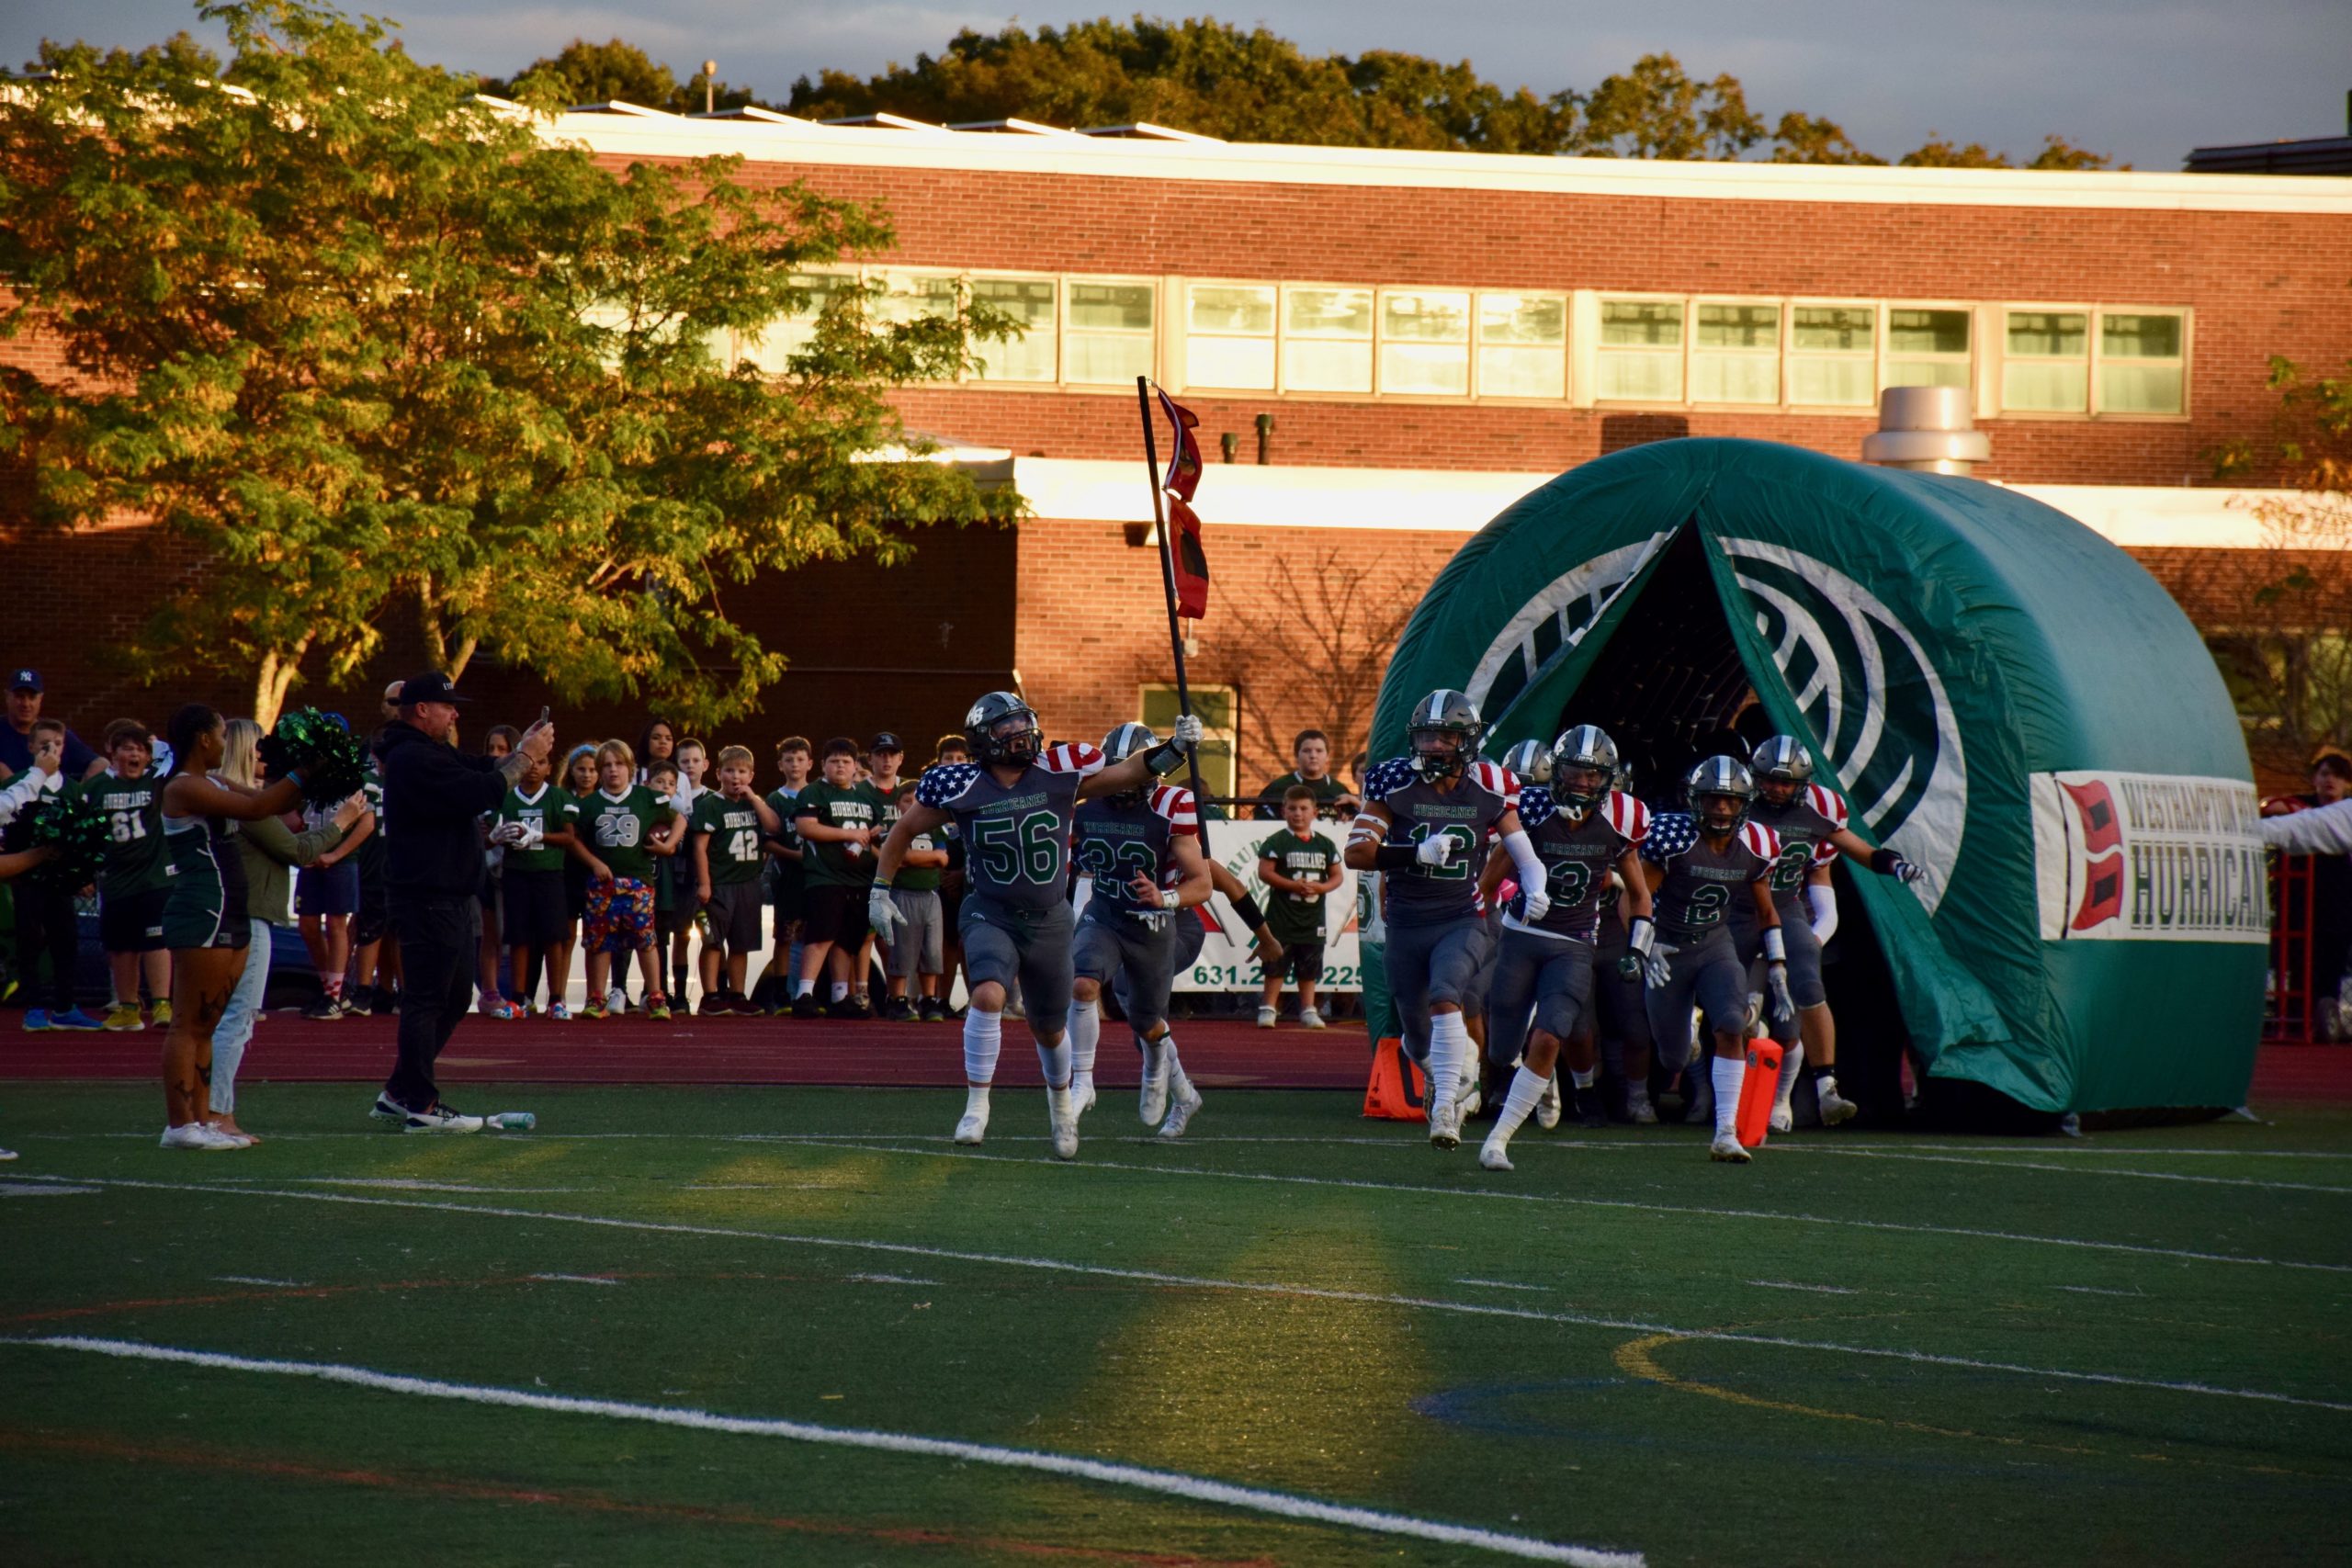 Hurricane pride was abundant as the Westhampton Beach School District celebrated homecoming during the week of October 4.